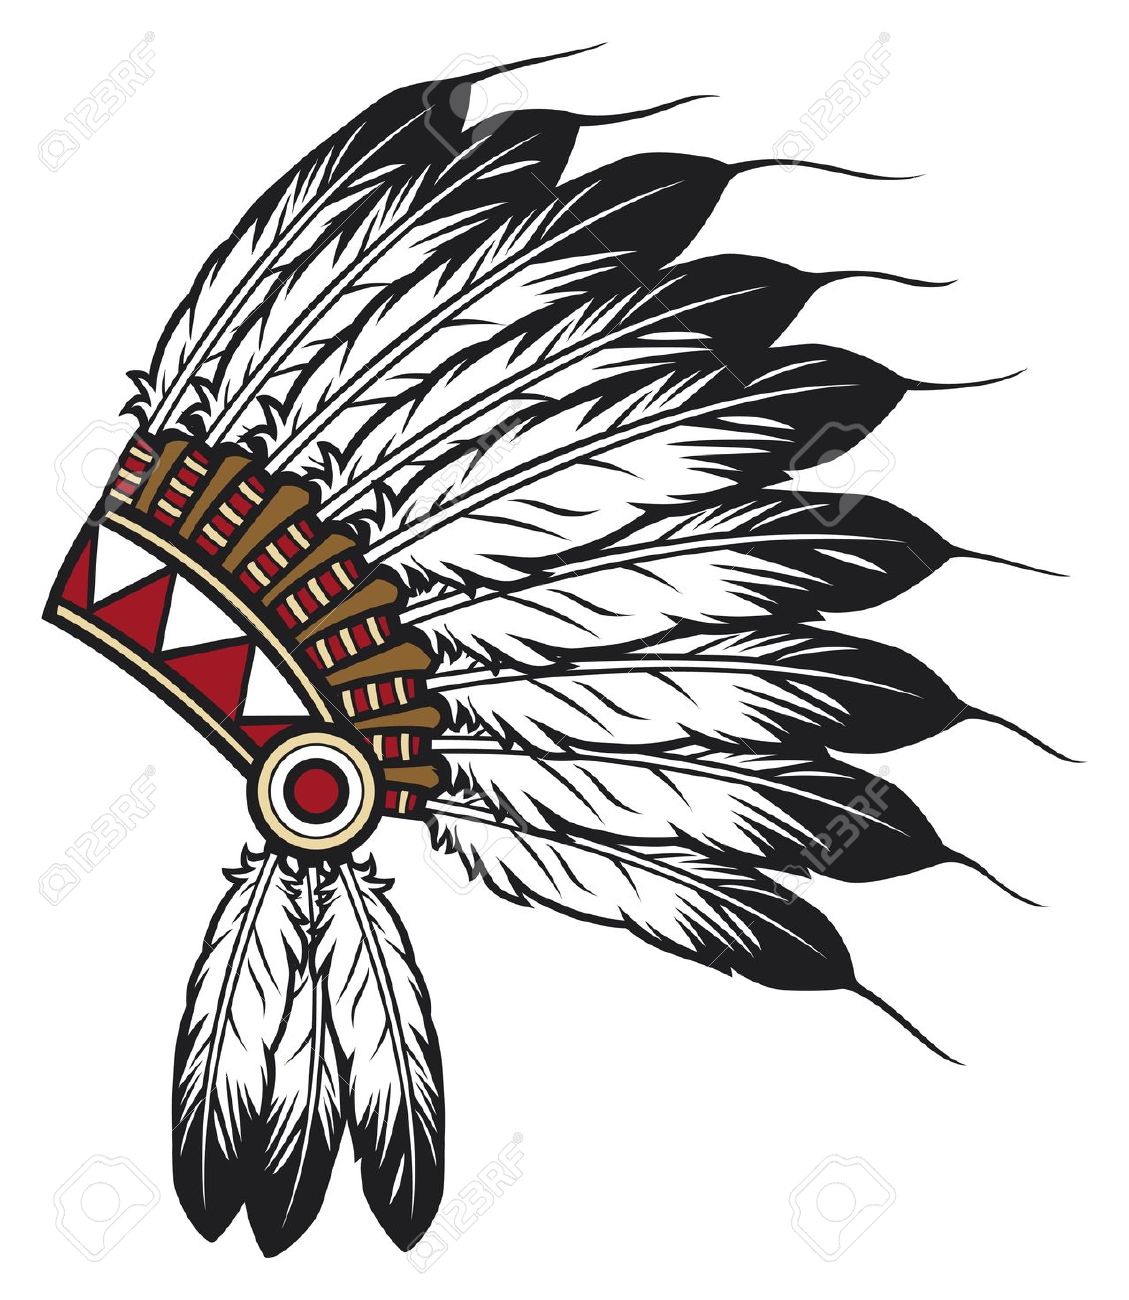 indian clipart black and white free download - photo #26